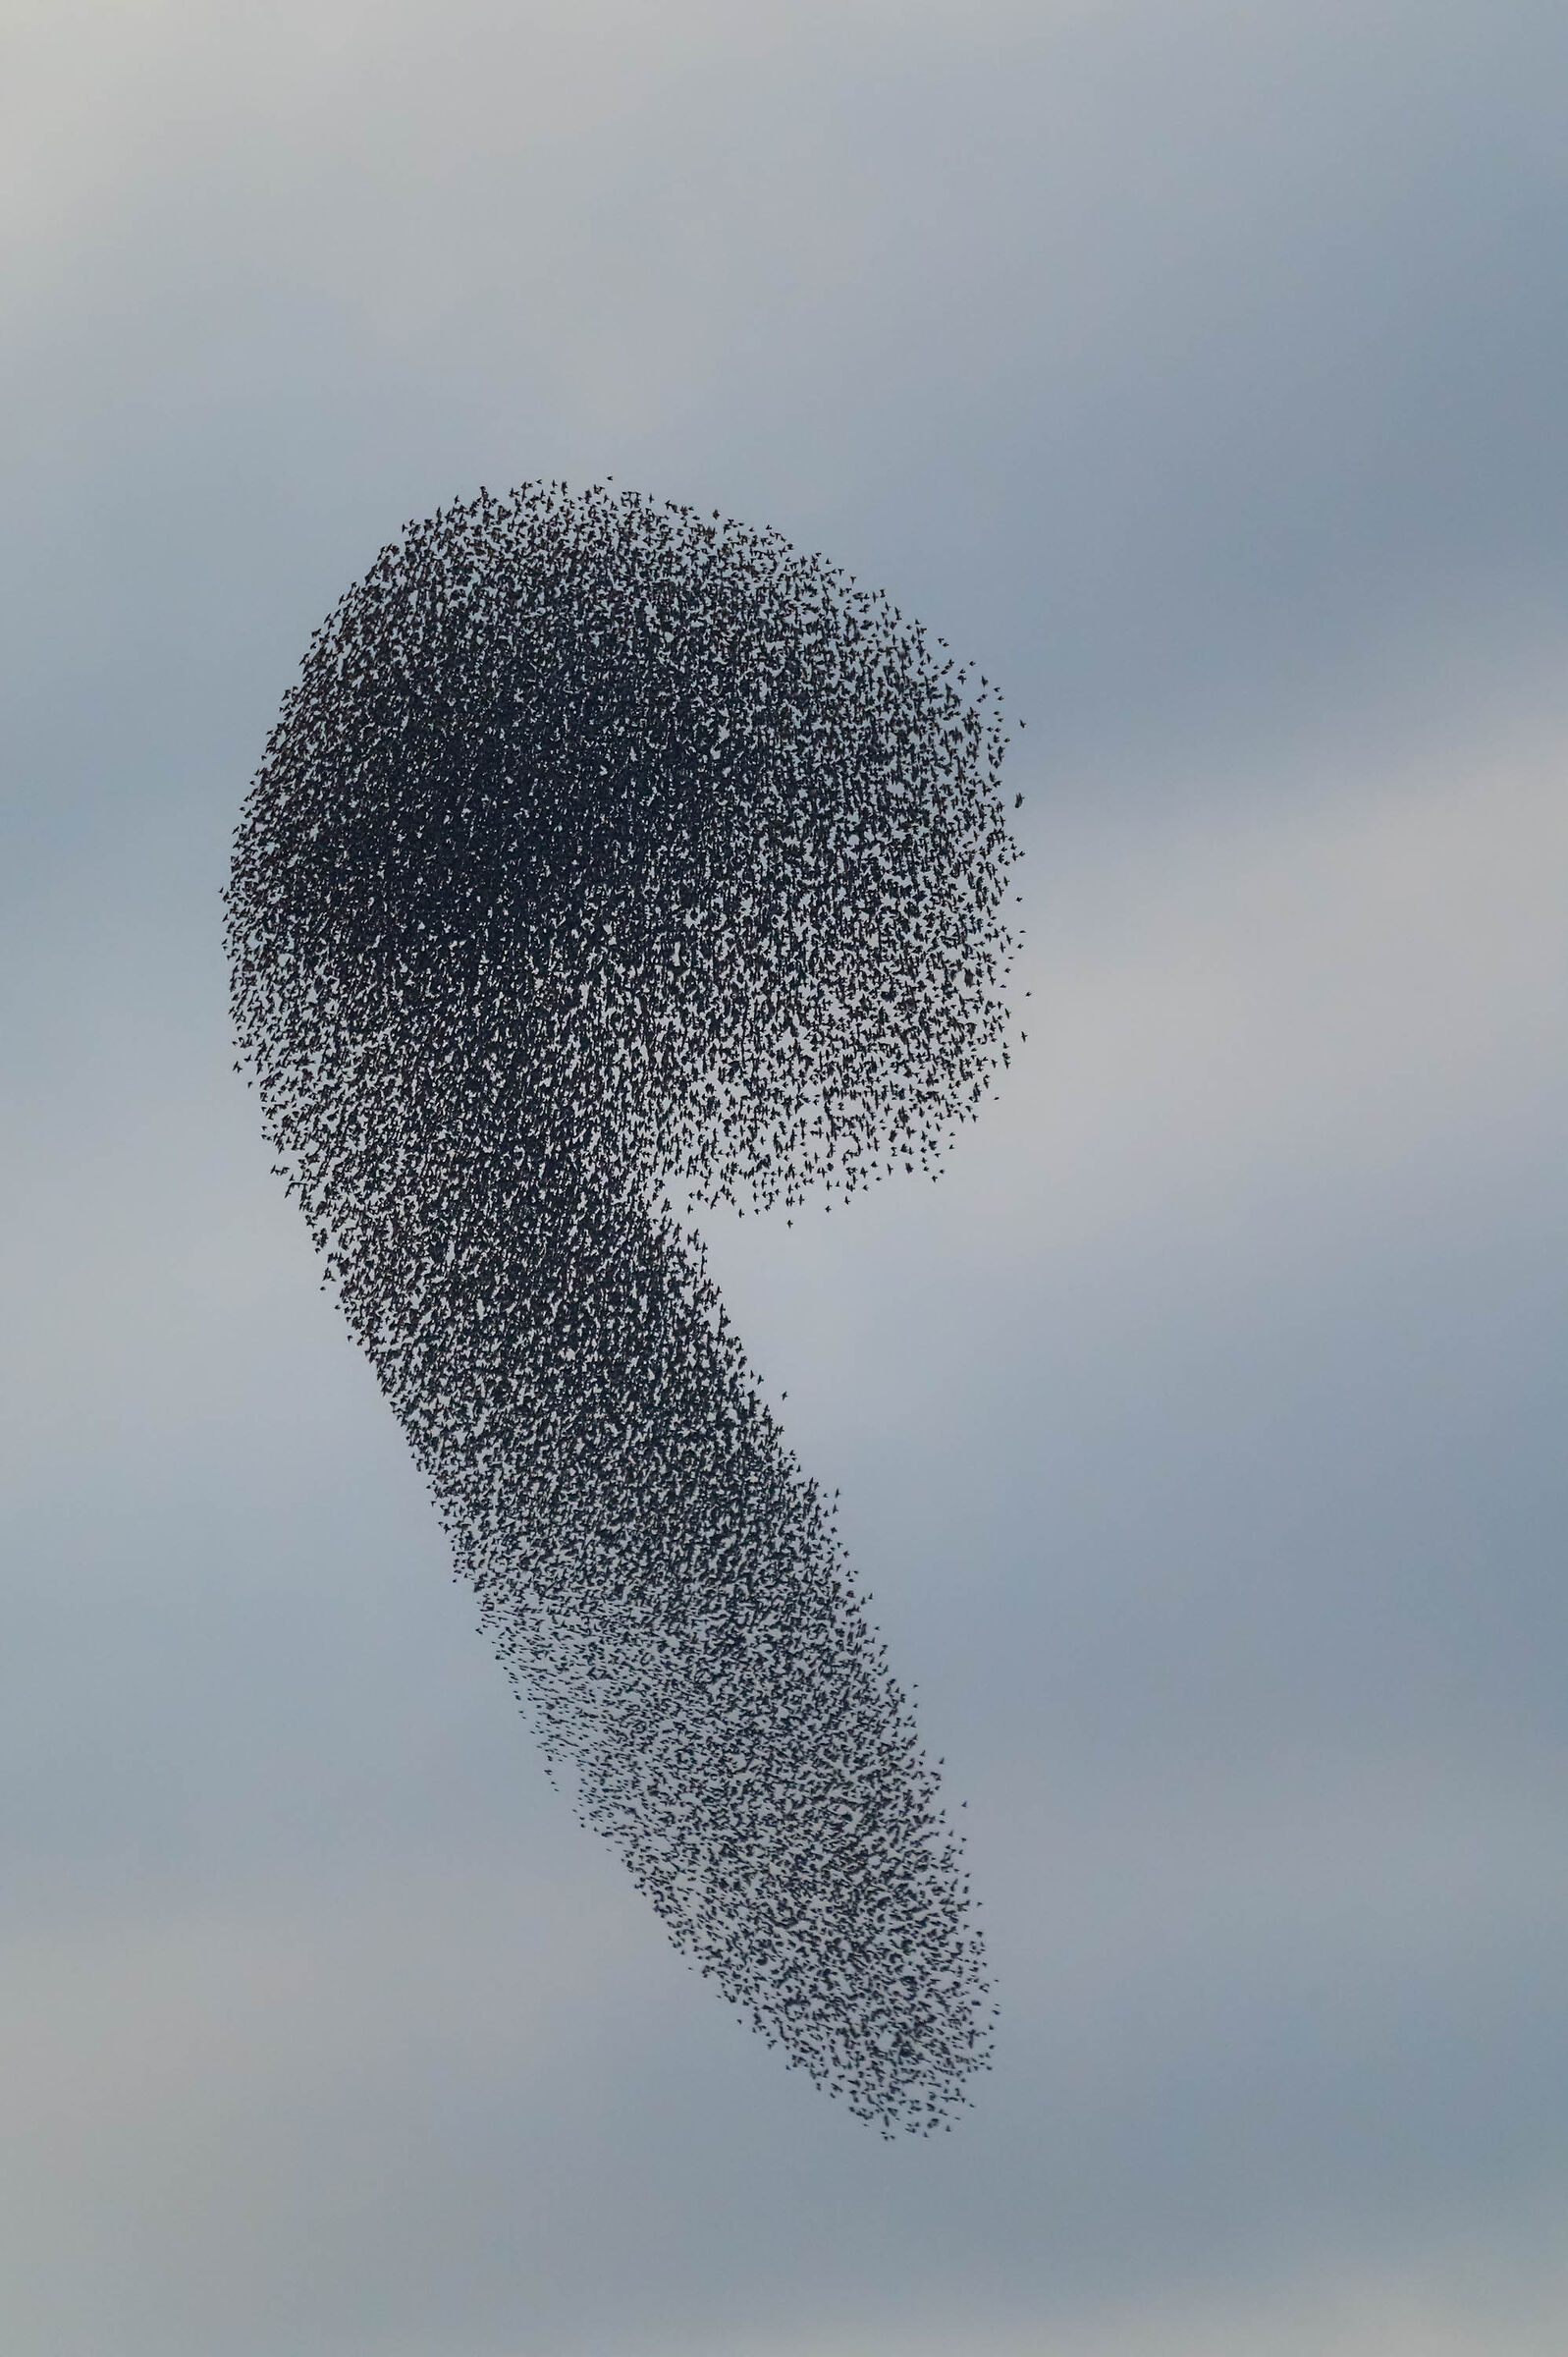 The rudeness of starlings...